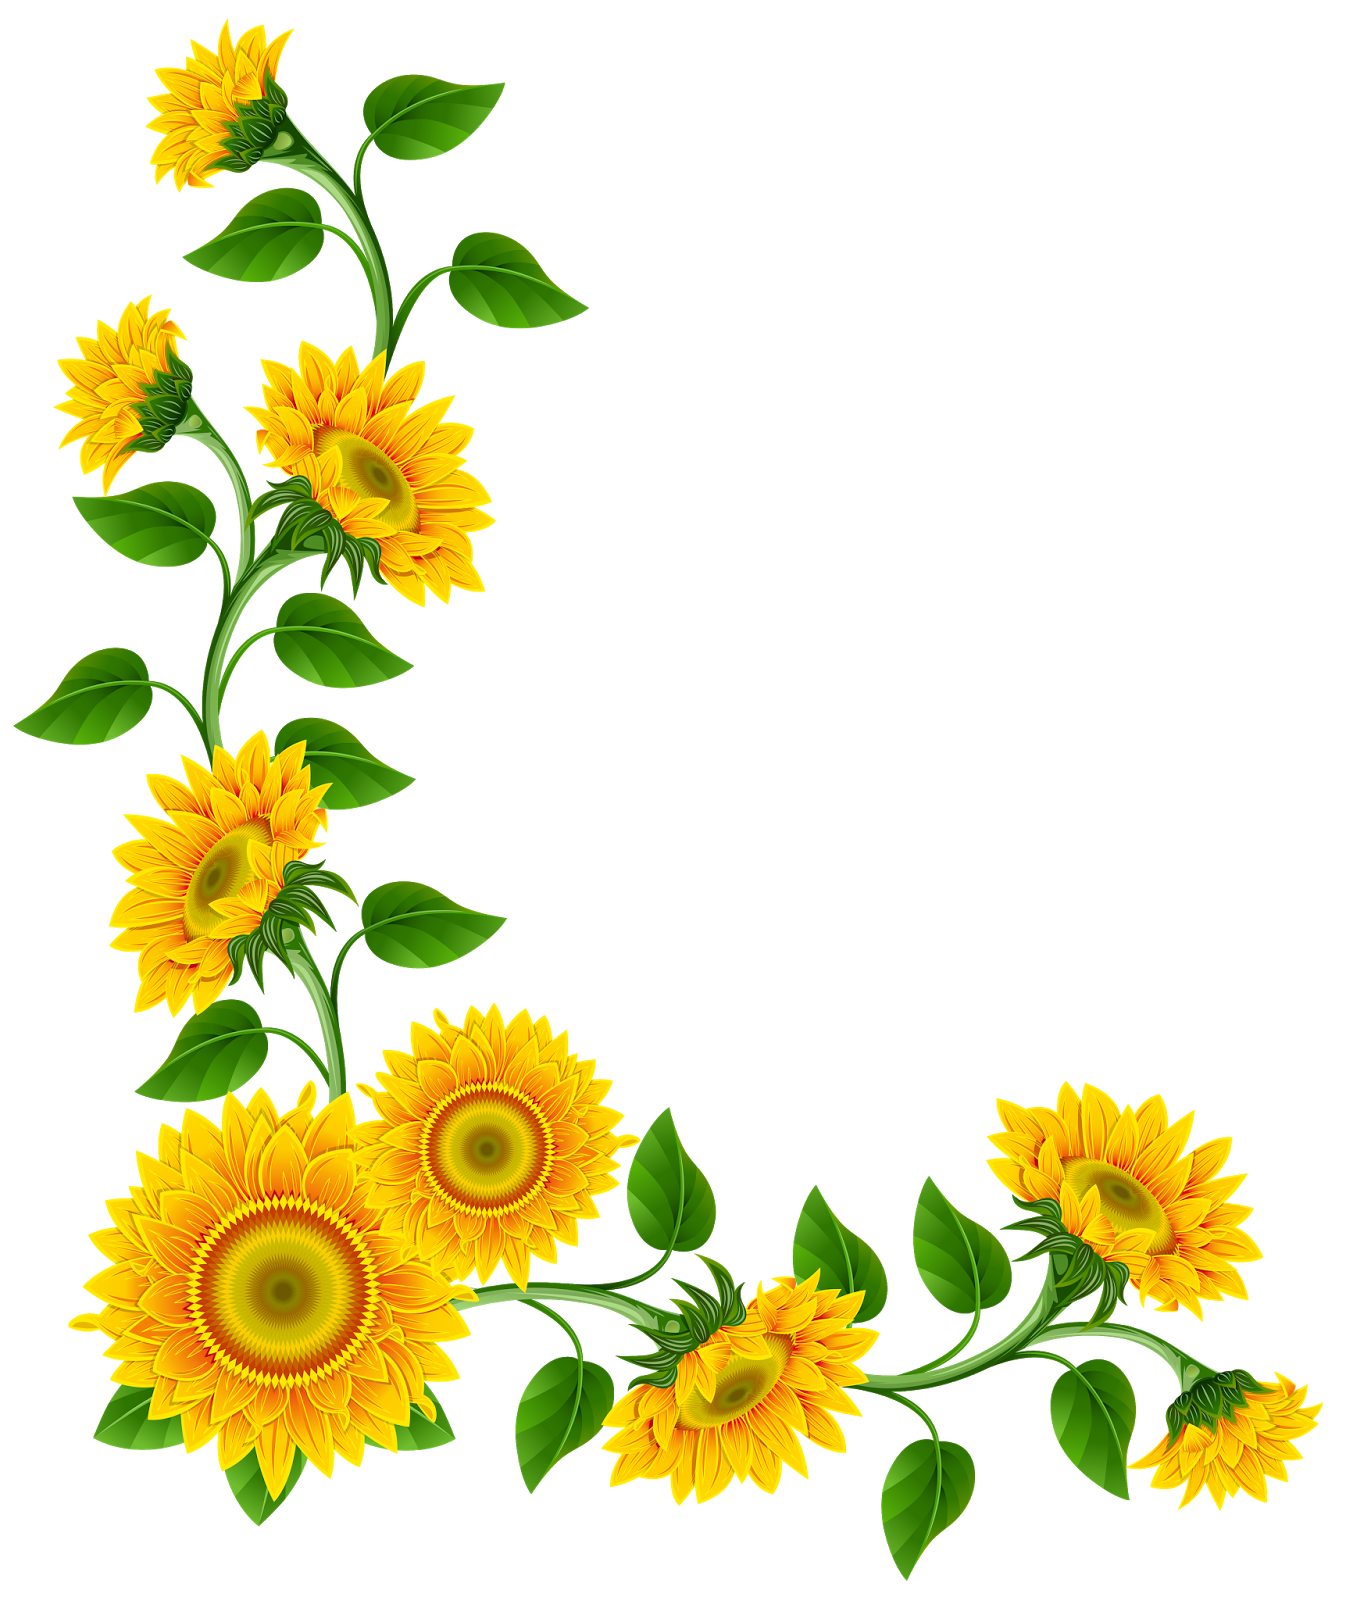 Download Sunflower PNG, Sunflower Transparent Background - FreeIconsPNG